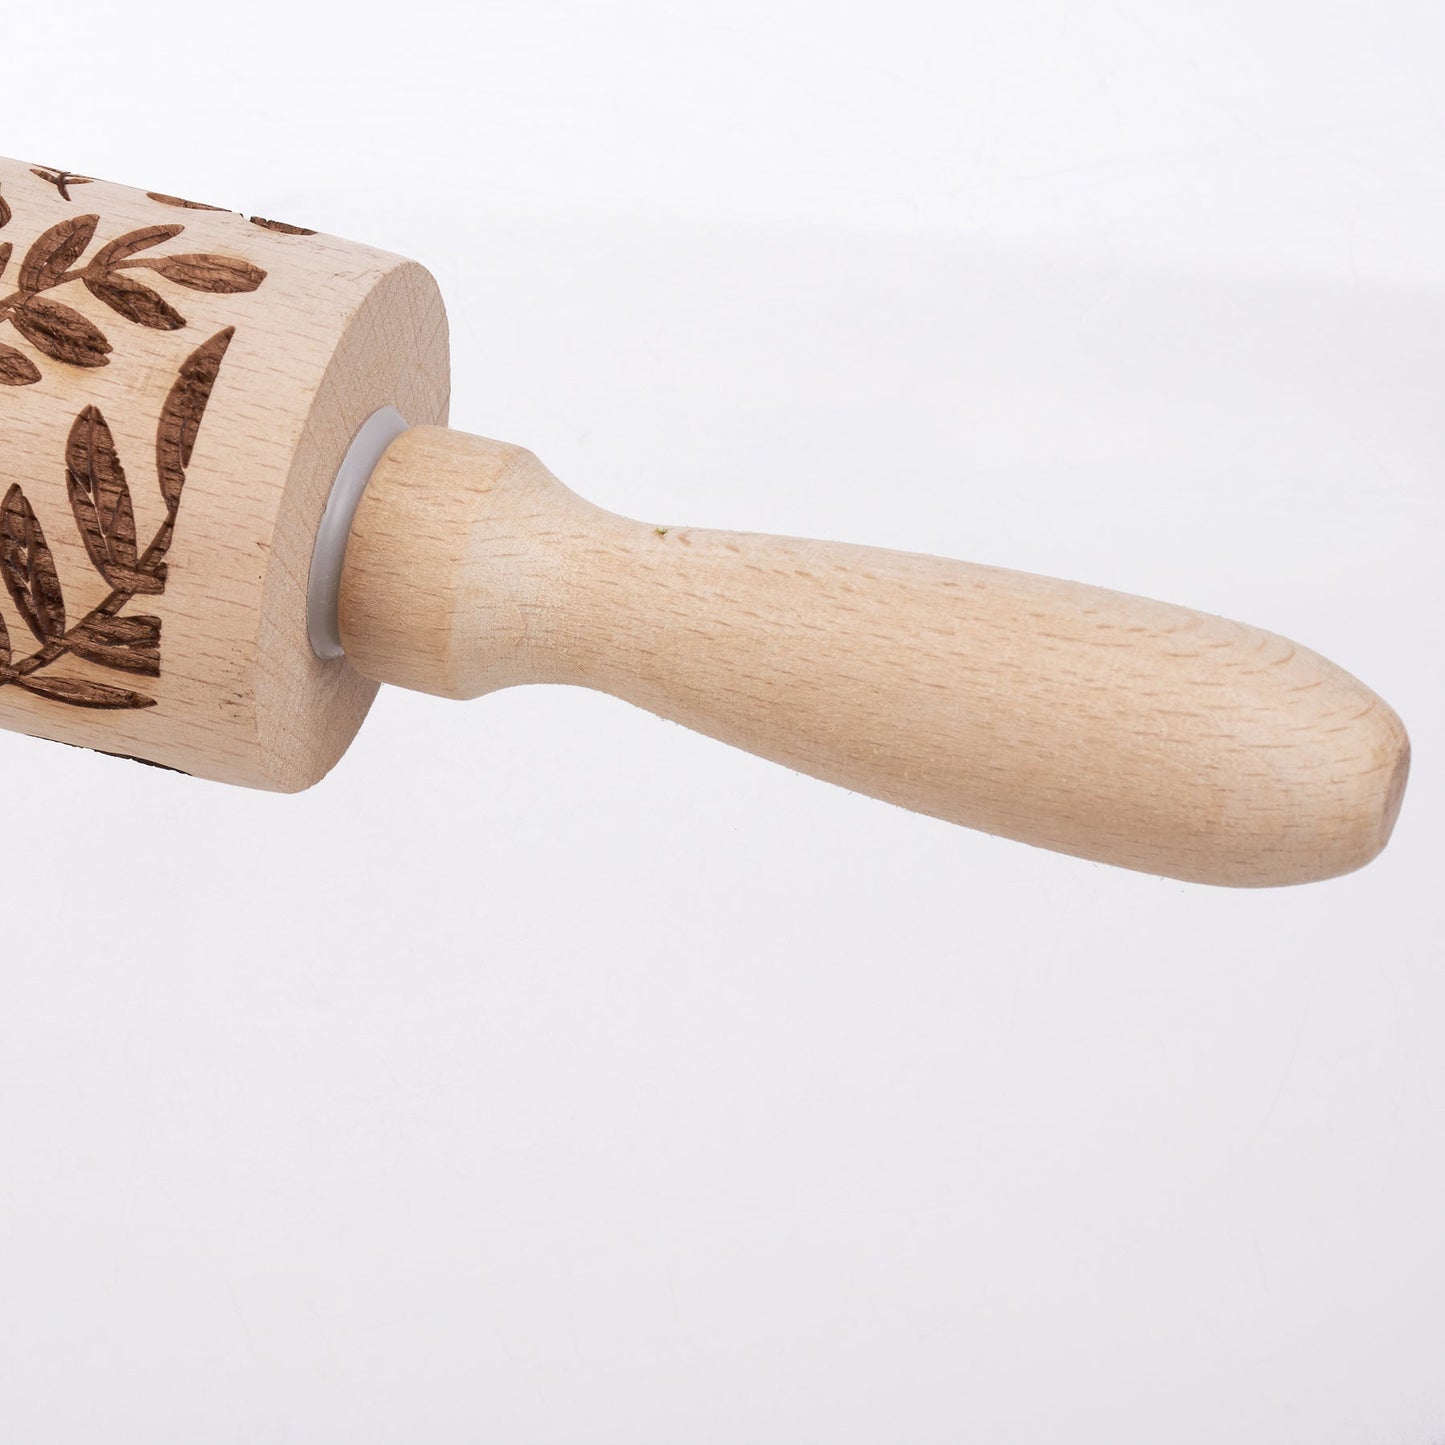 Mushrooms Small Embossing Rolling Pin | Creates Mushrooms and Florals Design